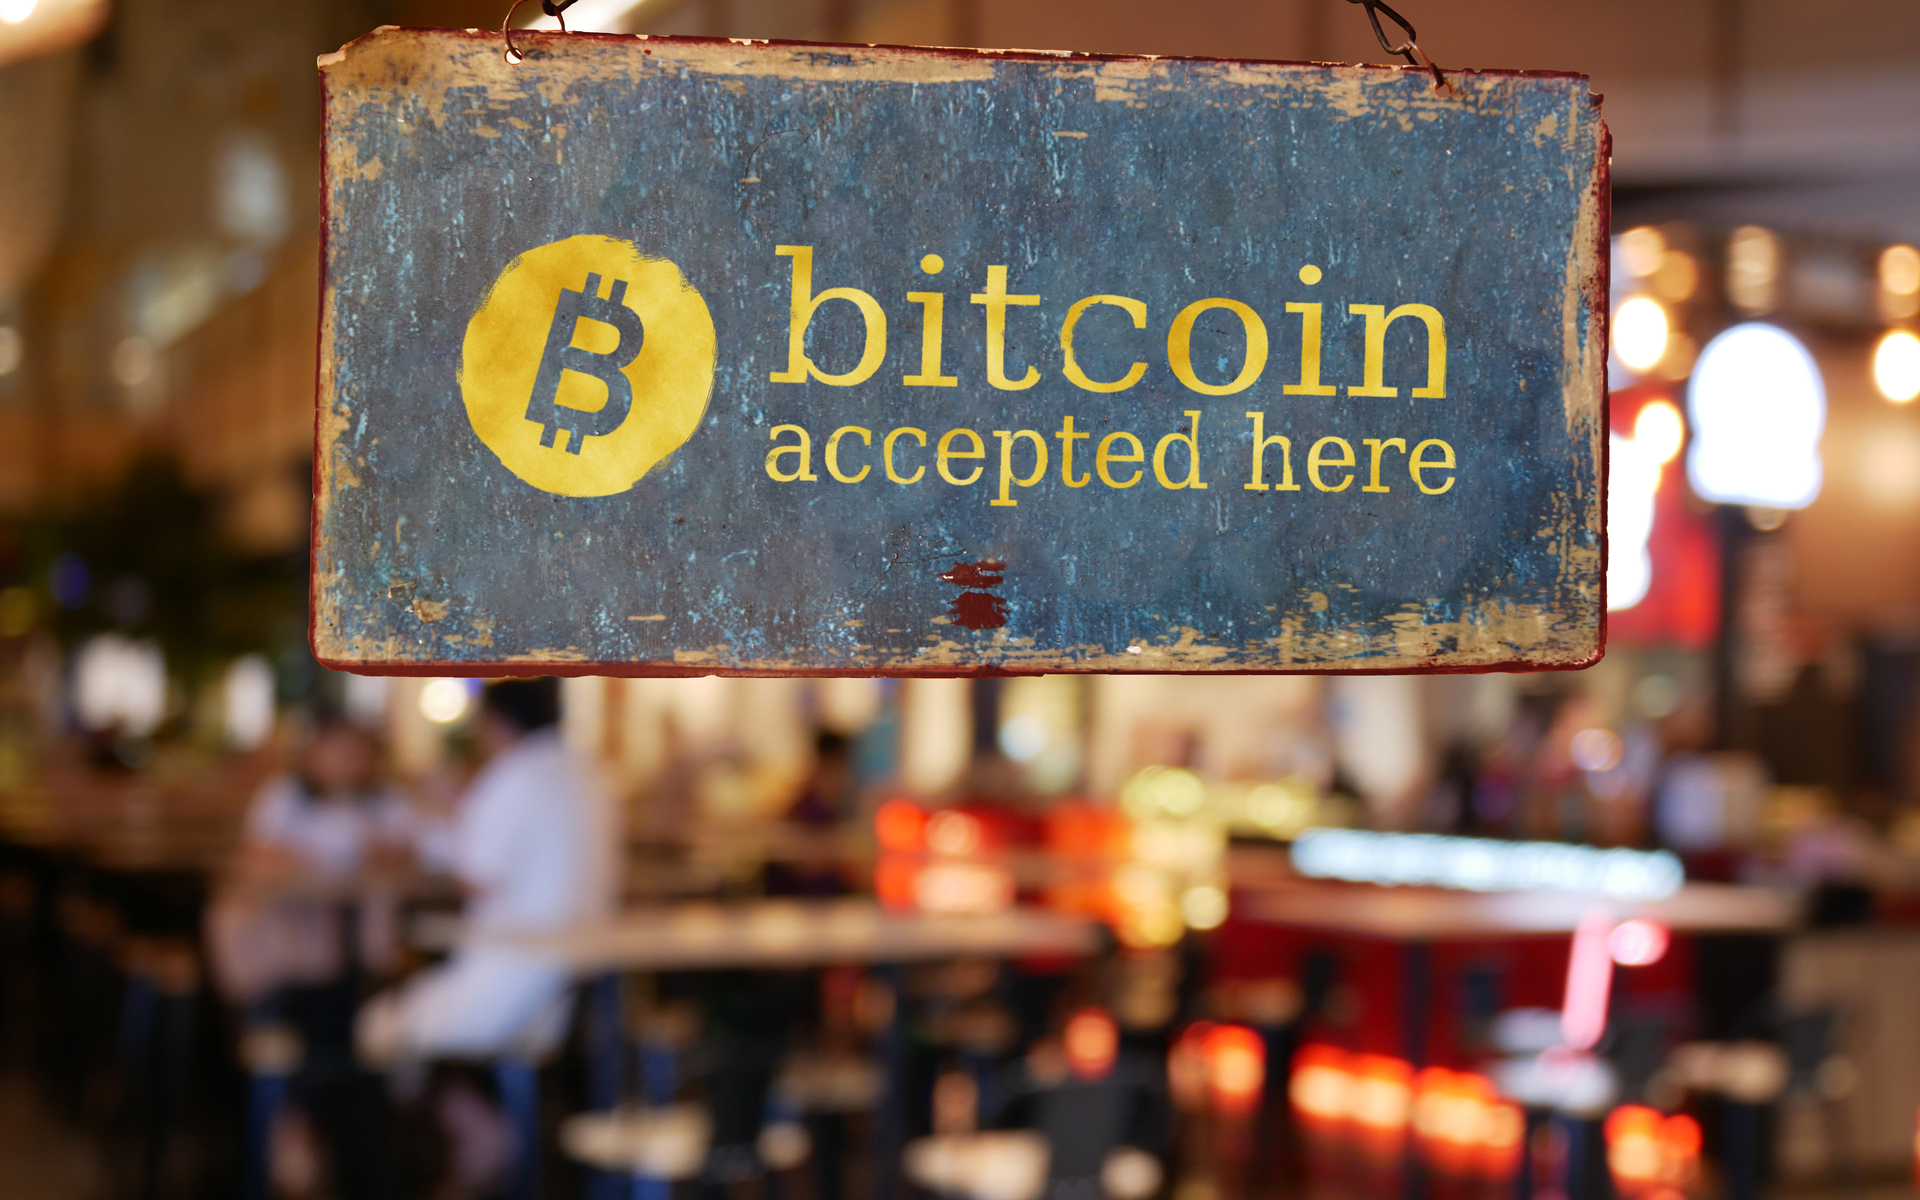 36% of U.S SMEs Now Accept Cryptocurrency Payments